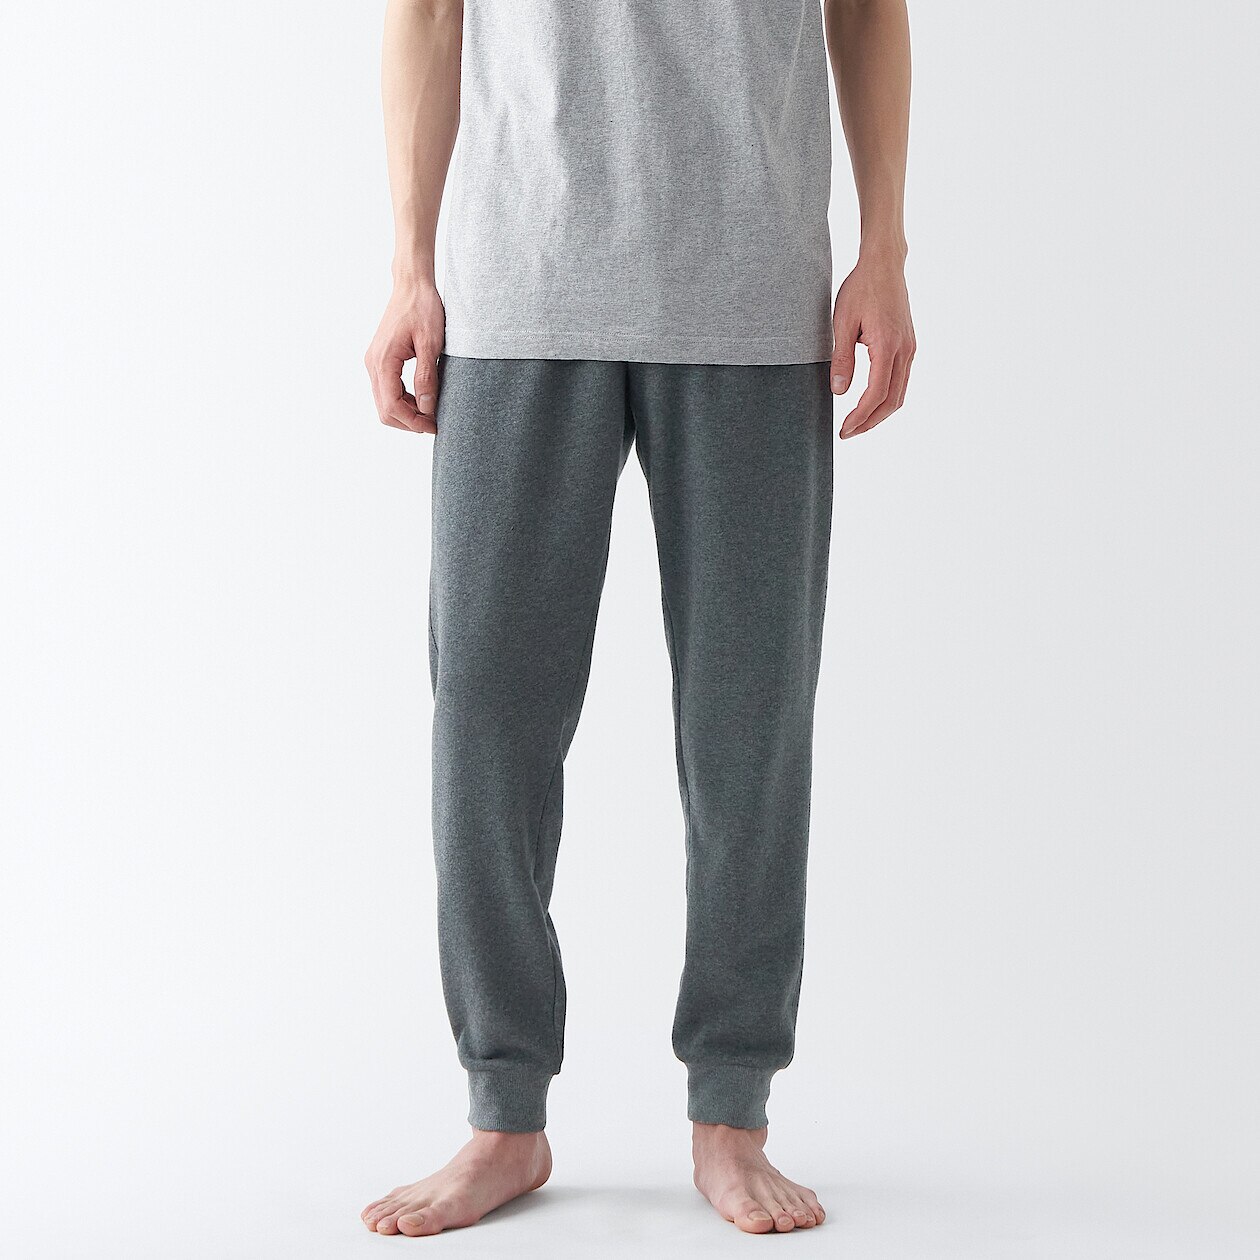 Men's French Terry Trousers